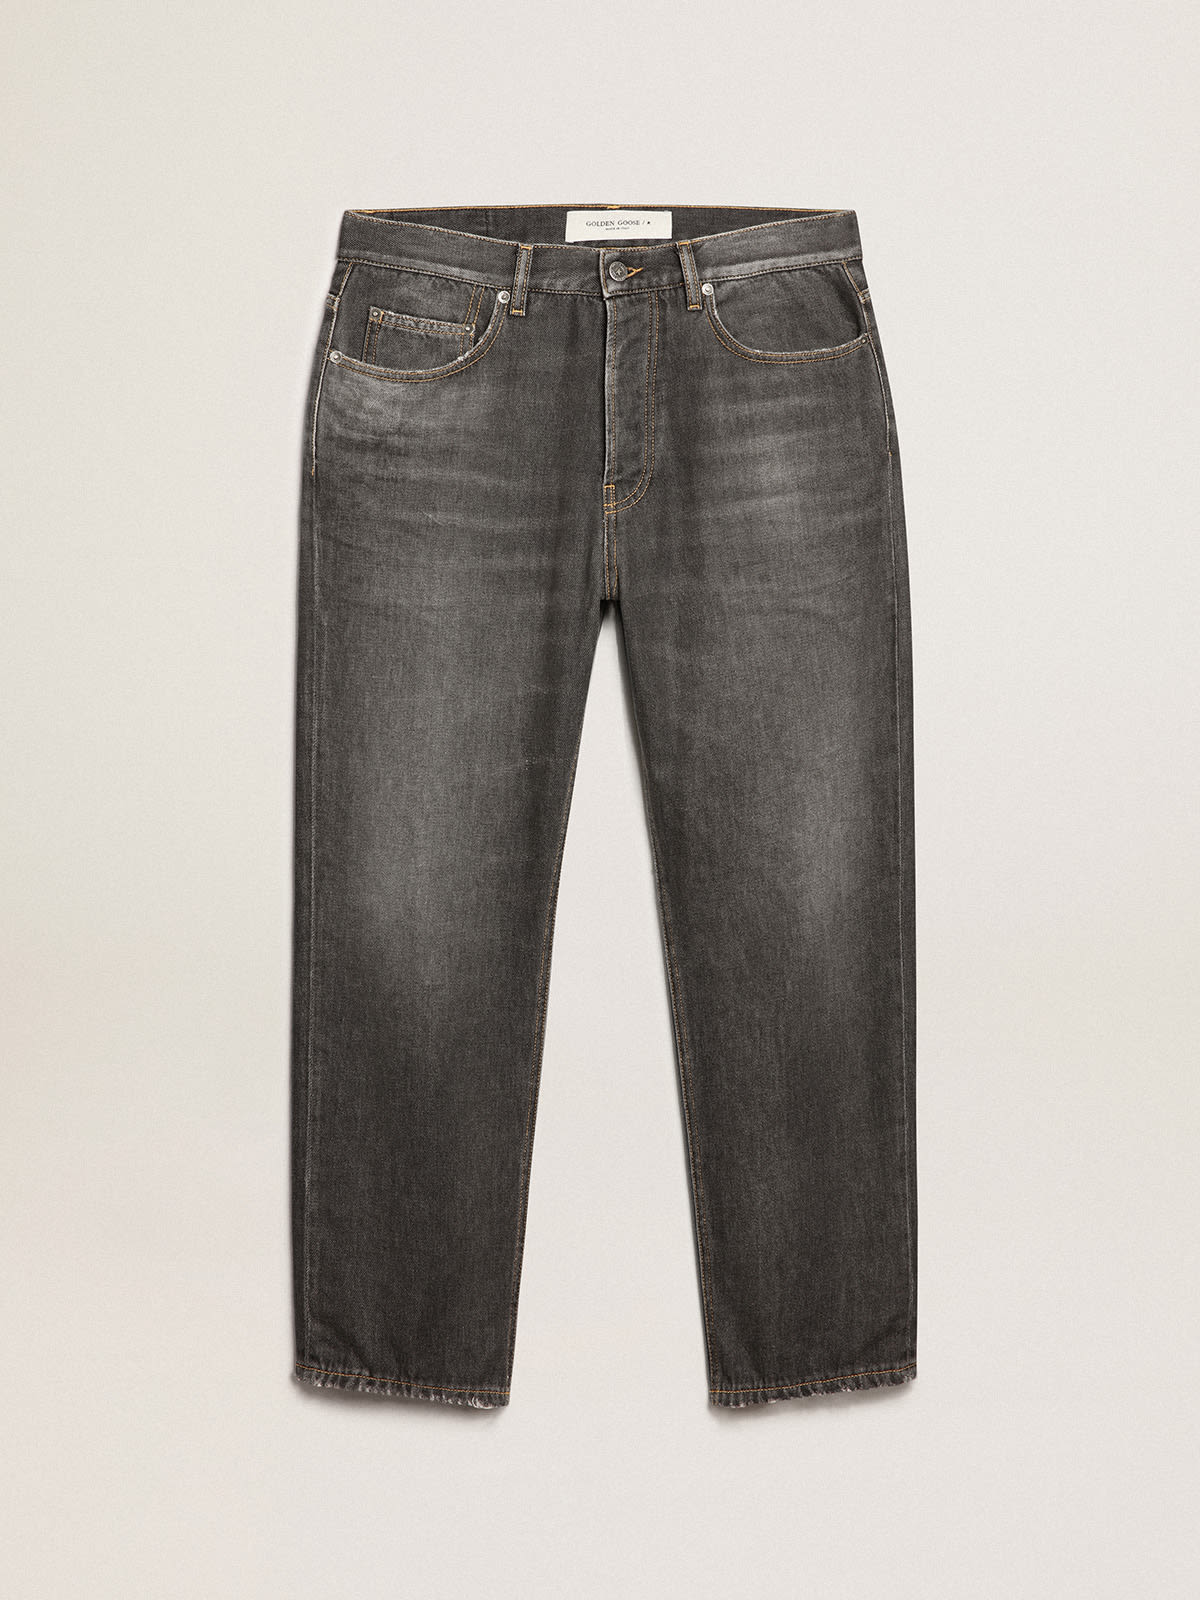 Golden Goose - Journey Collection stonewashed-effect black Cory jeans in 